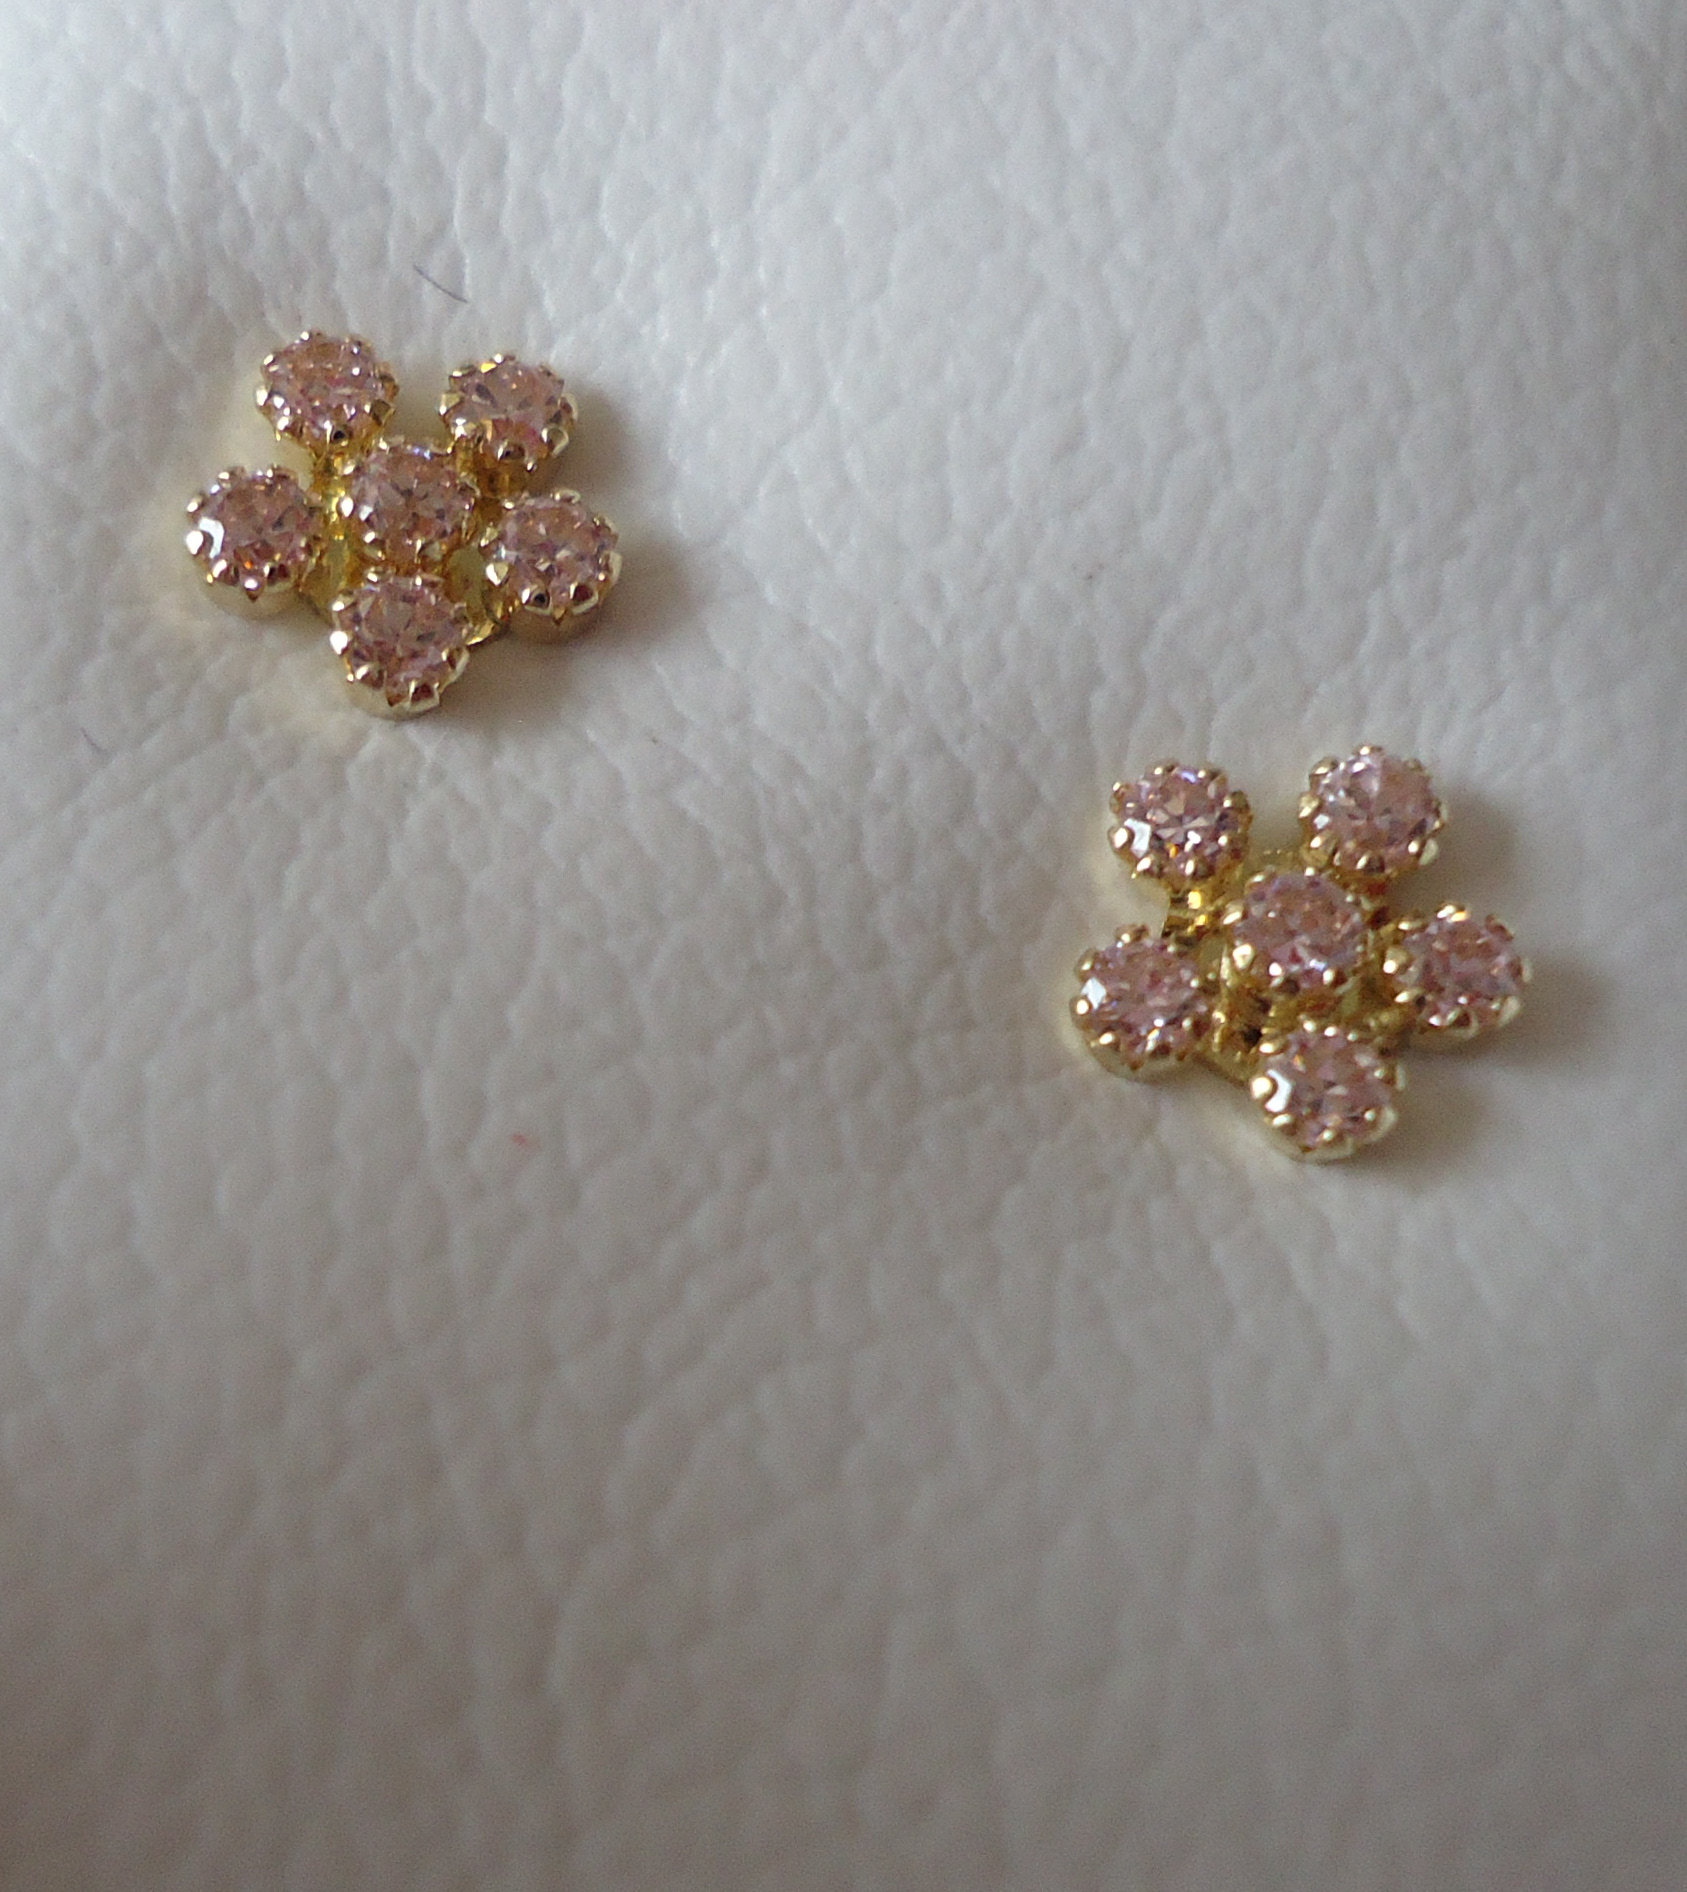 14KT GOLD FLOWER EARRINGS WITH 6 PINK CUBIC Z